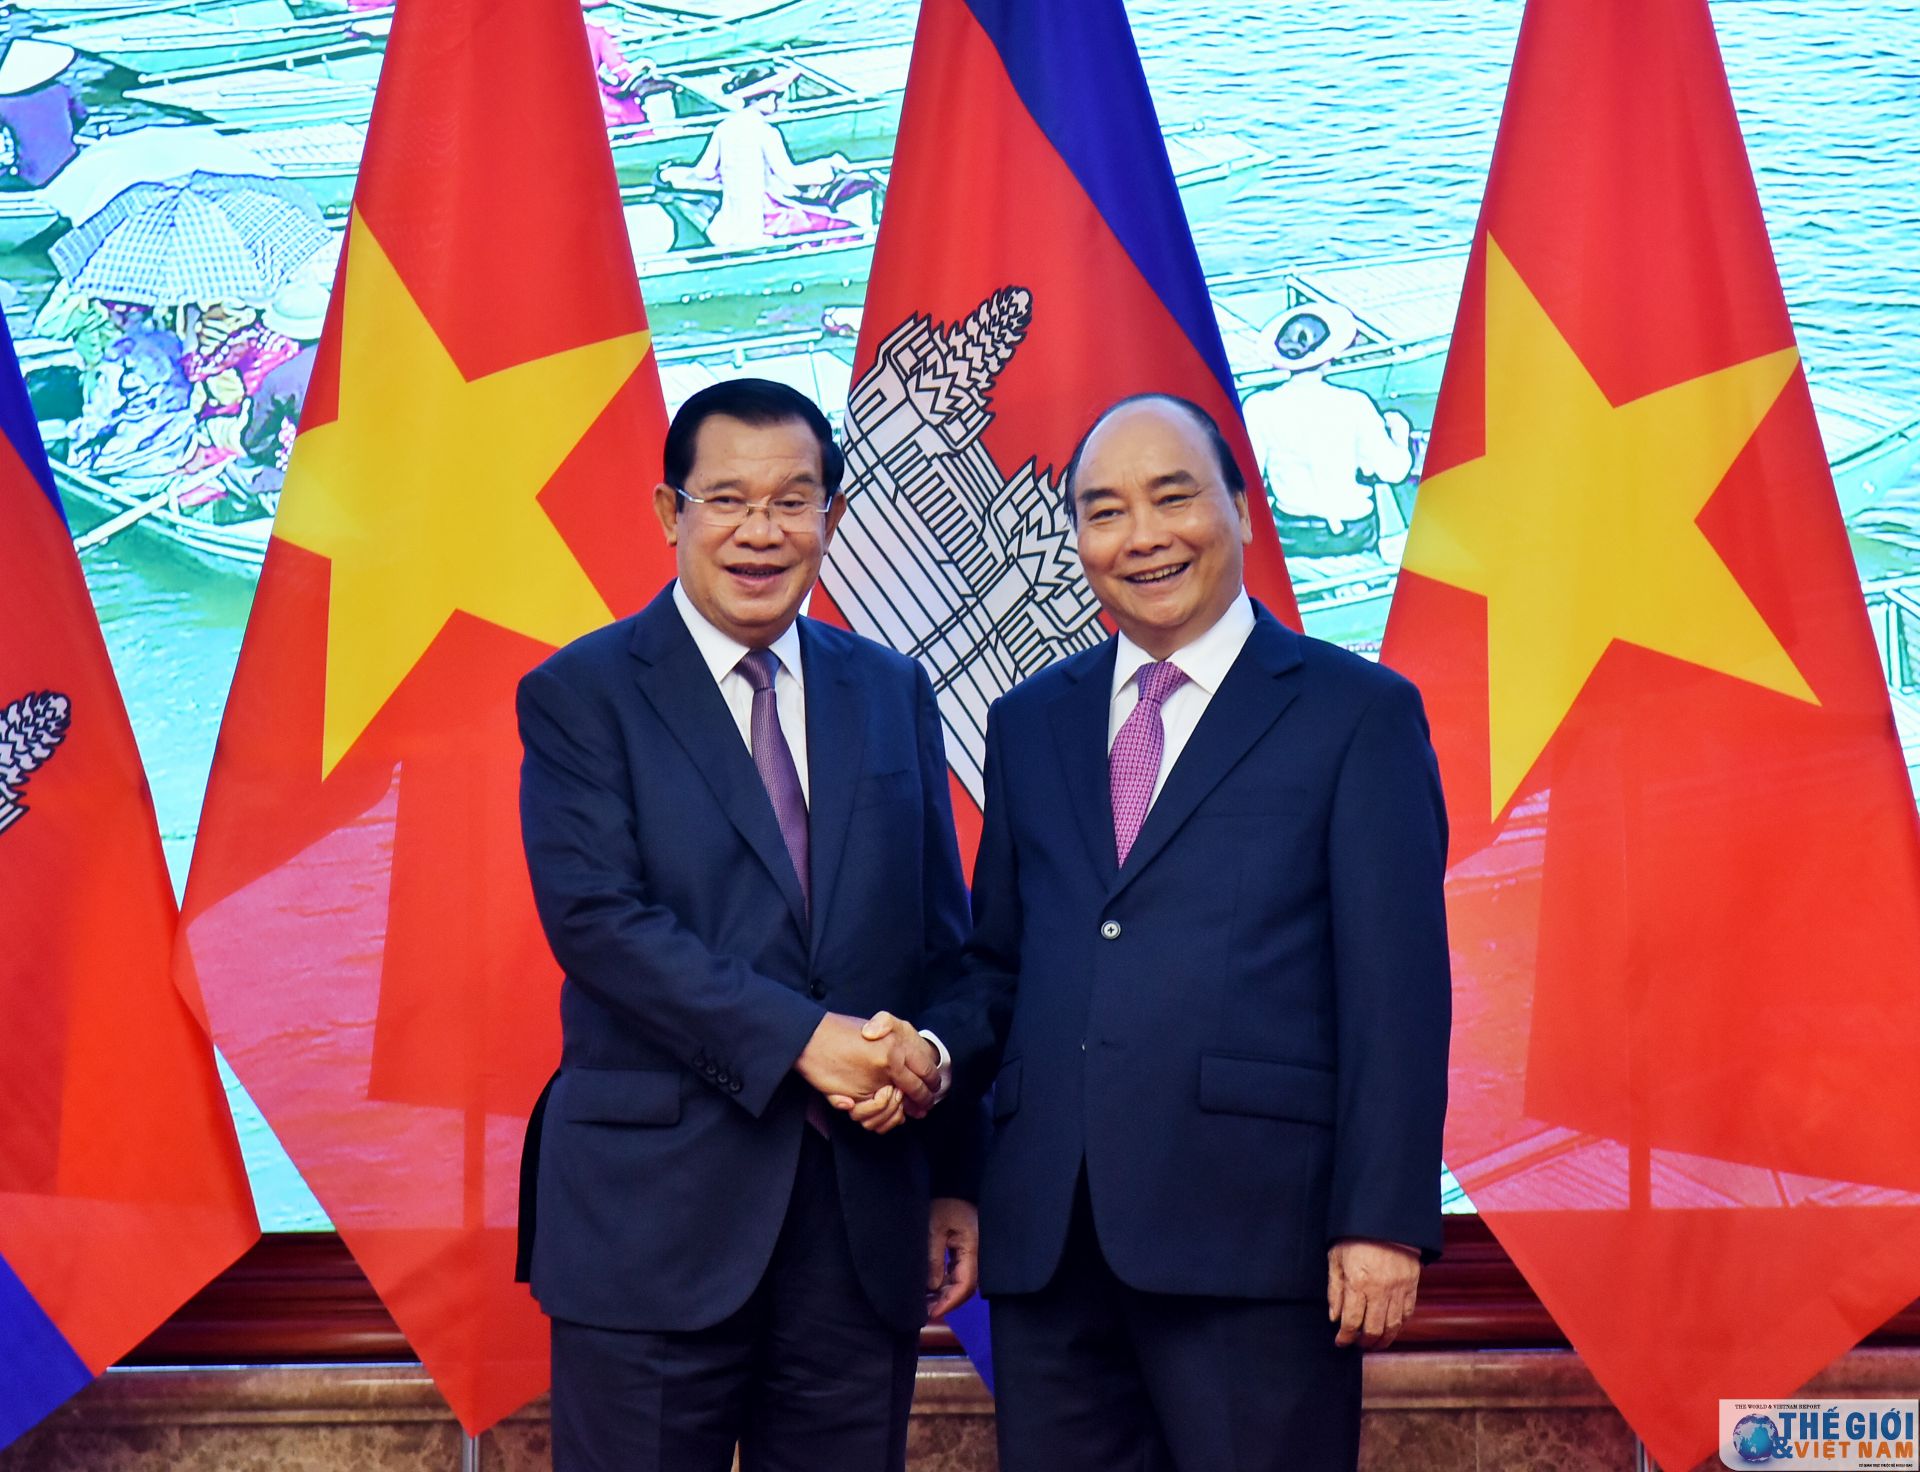 vietnam cambodia issue joint statement on the official visit of pm hun sen